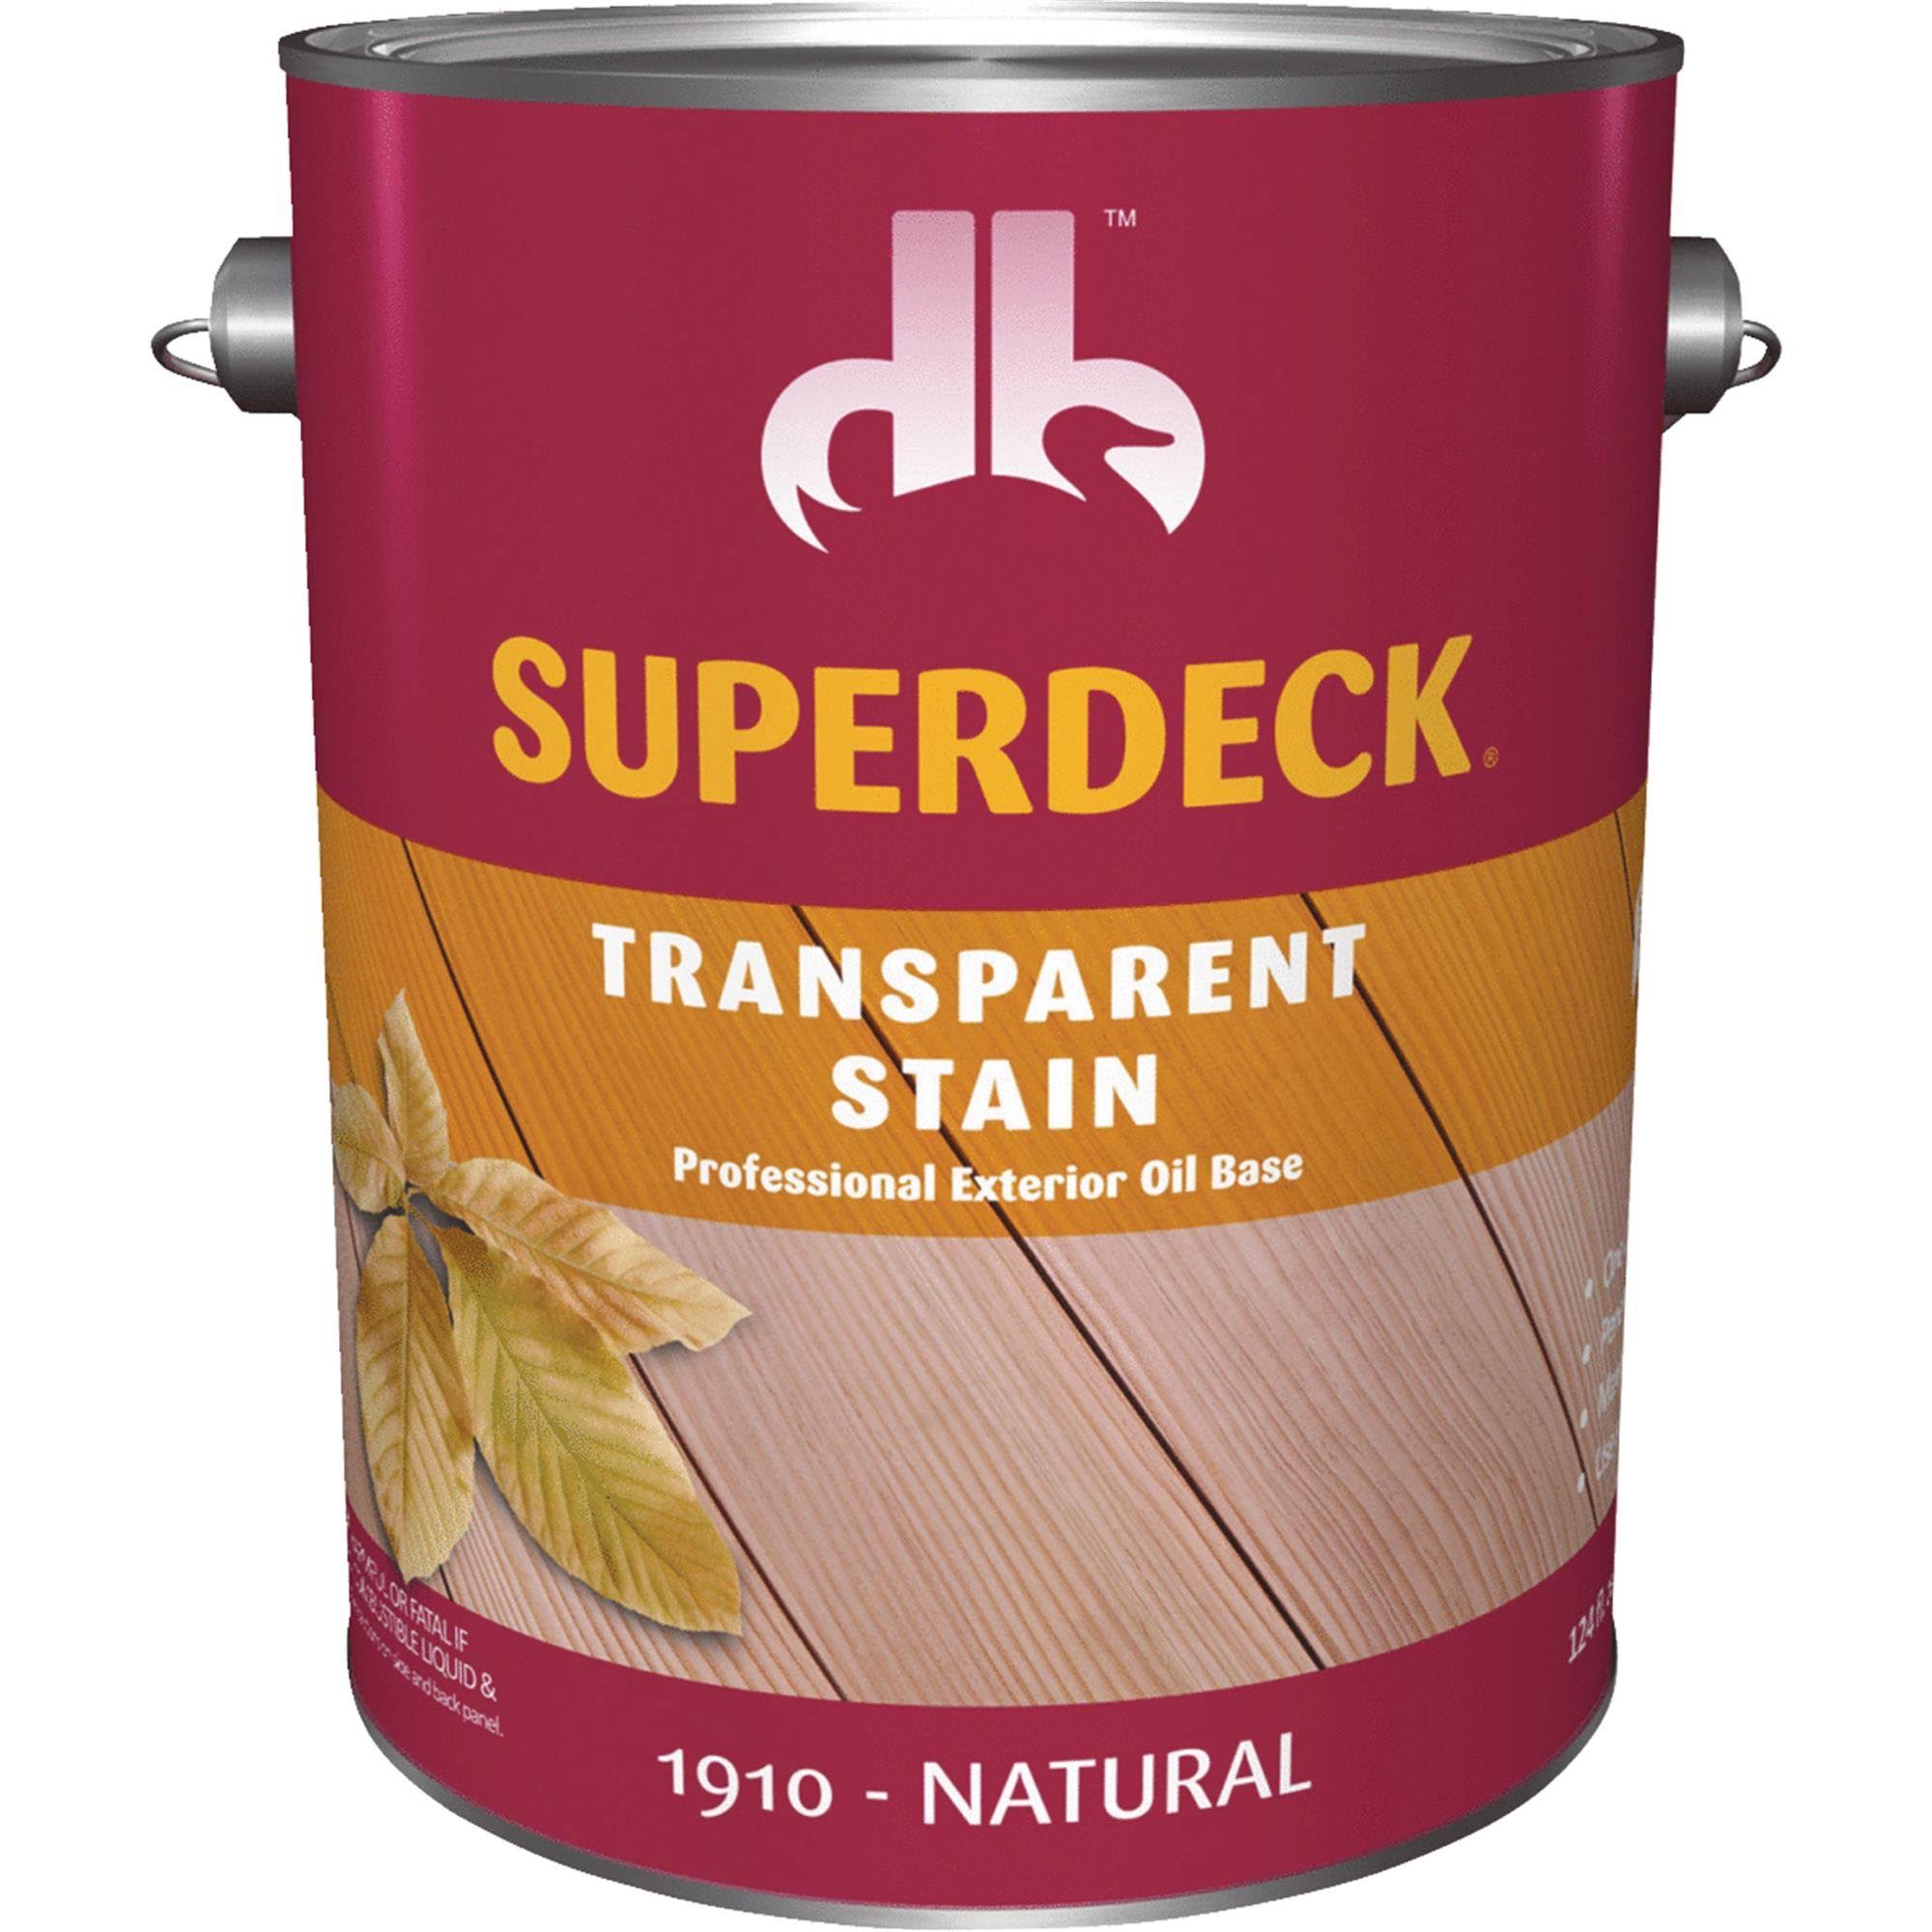 Duckback Products Superdeck Transparent Stain - 1910 Natural